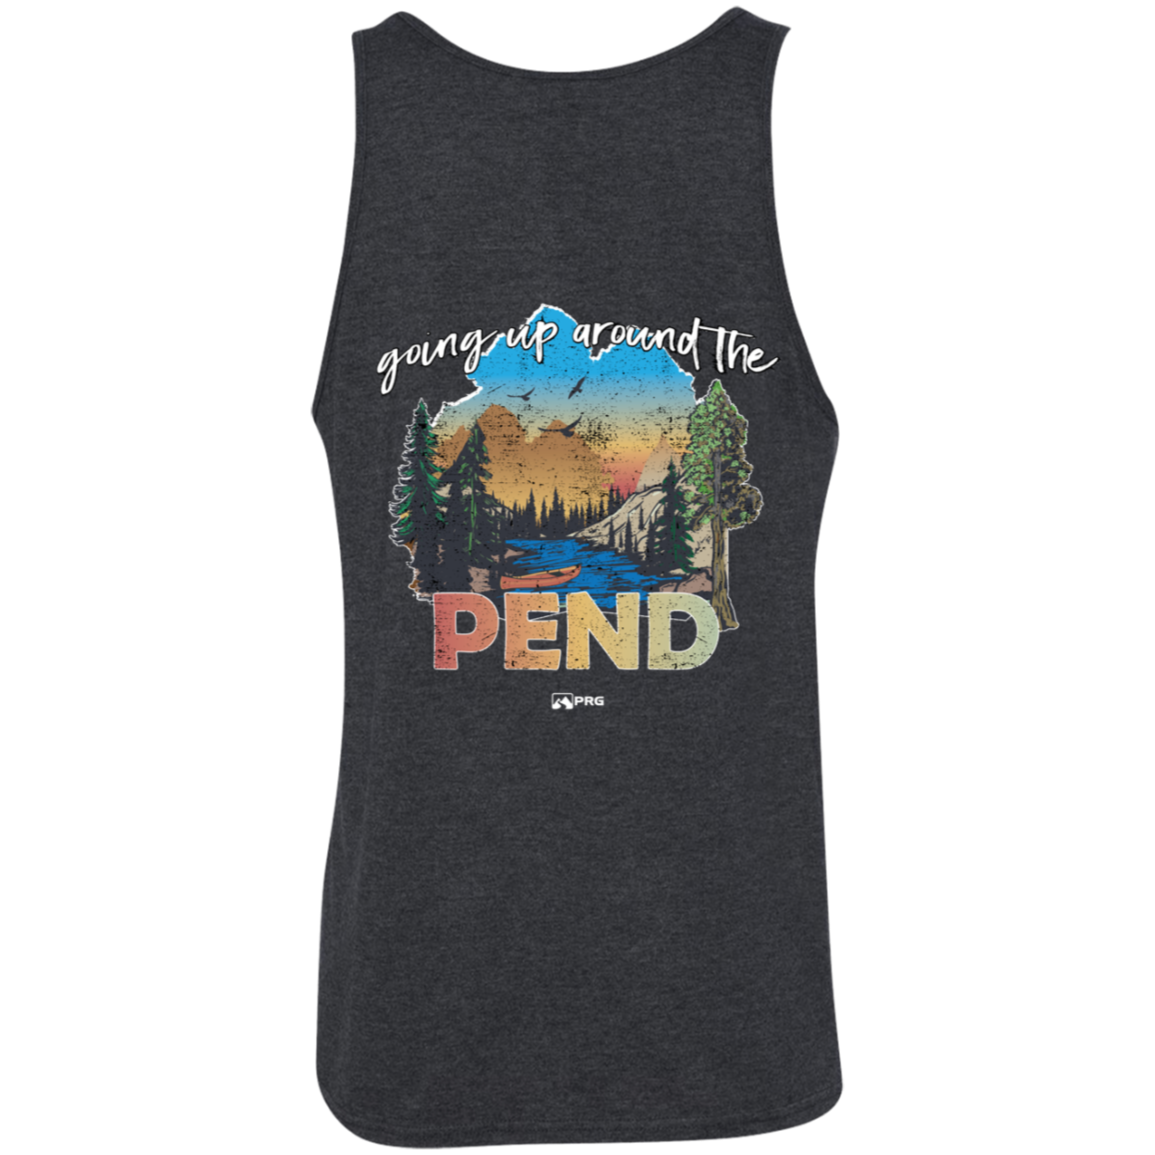 Around the Pend (Front & Back) - Tank